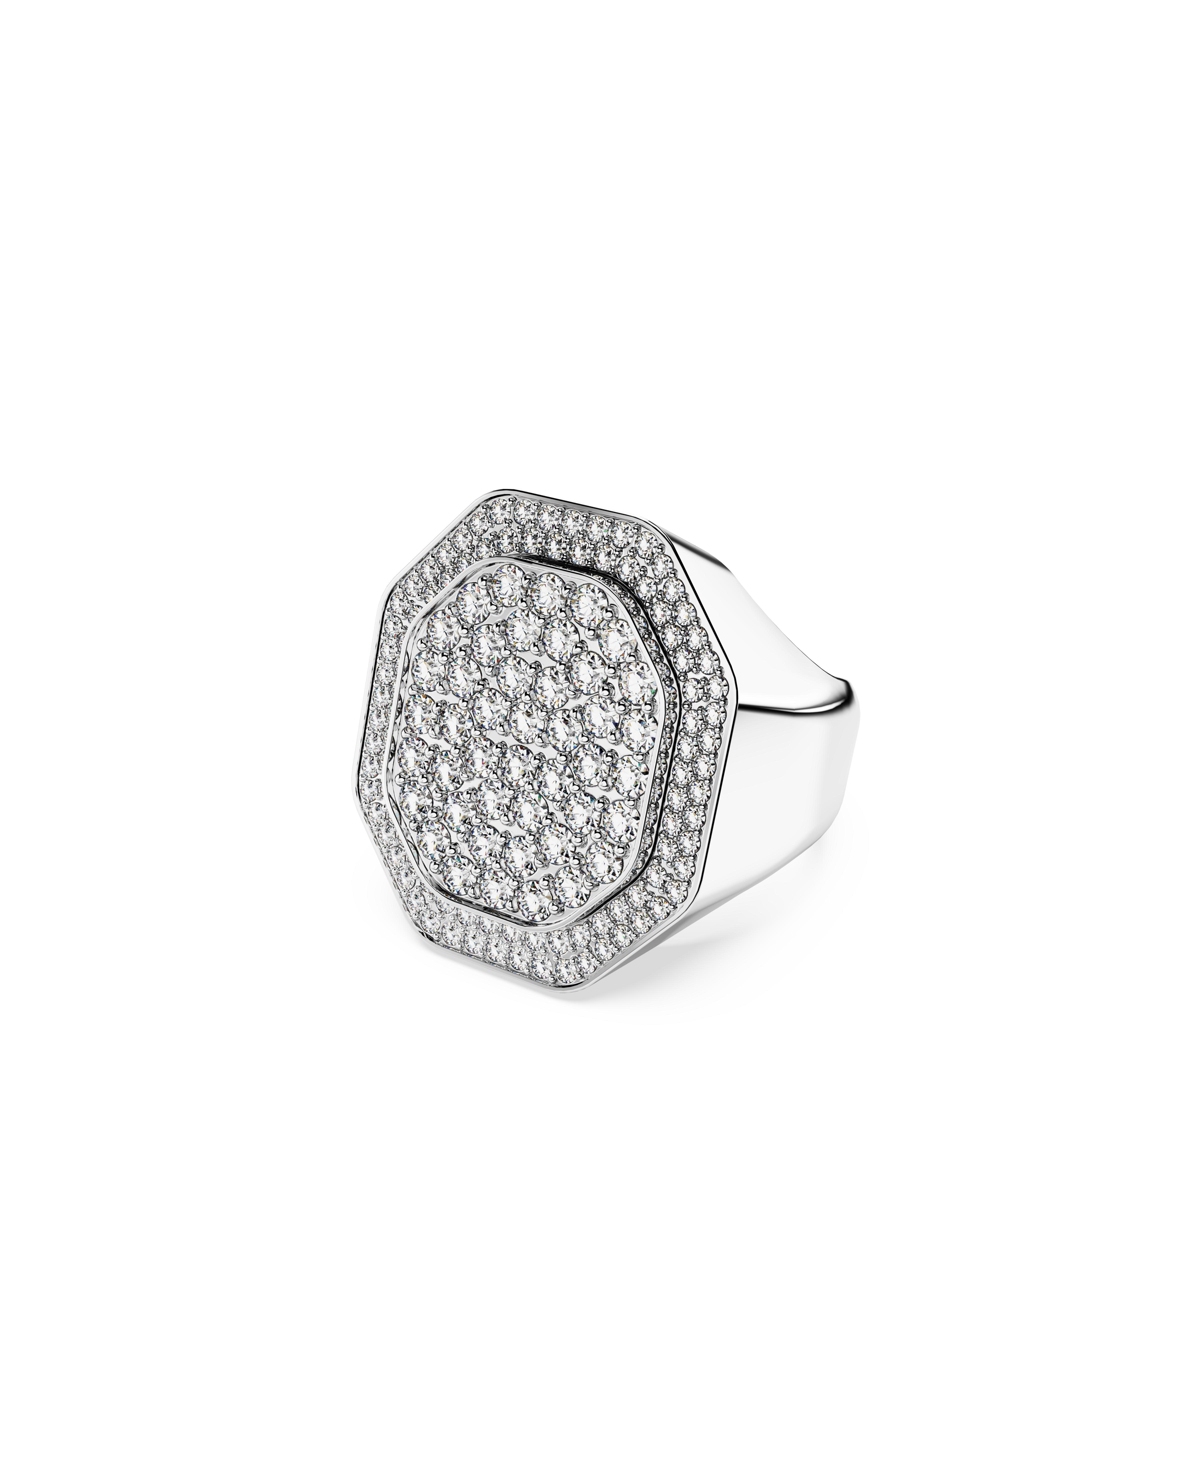 Swarovski Crystal Octagon Shaped White Dextera Cocktail Ring In Silver